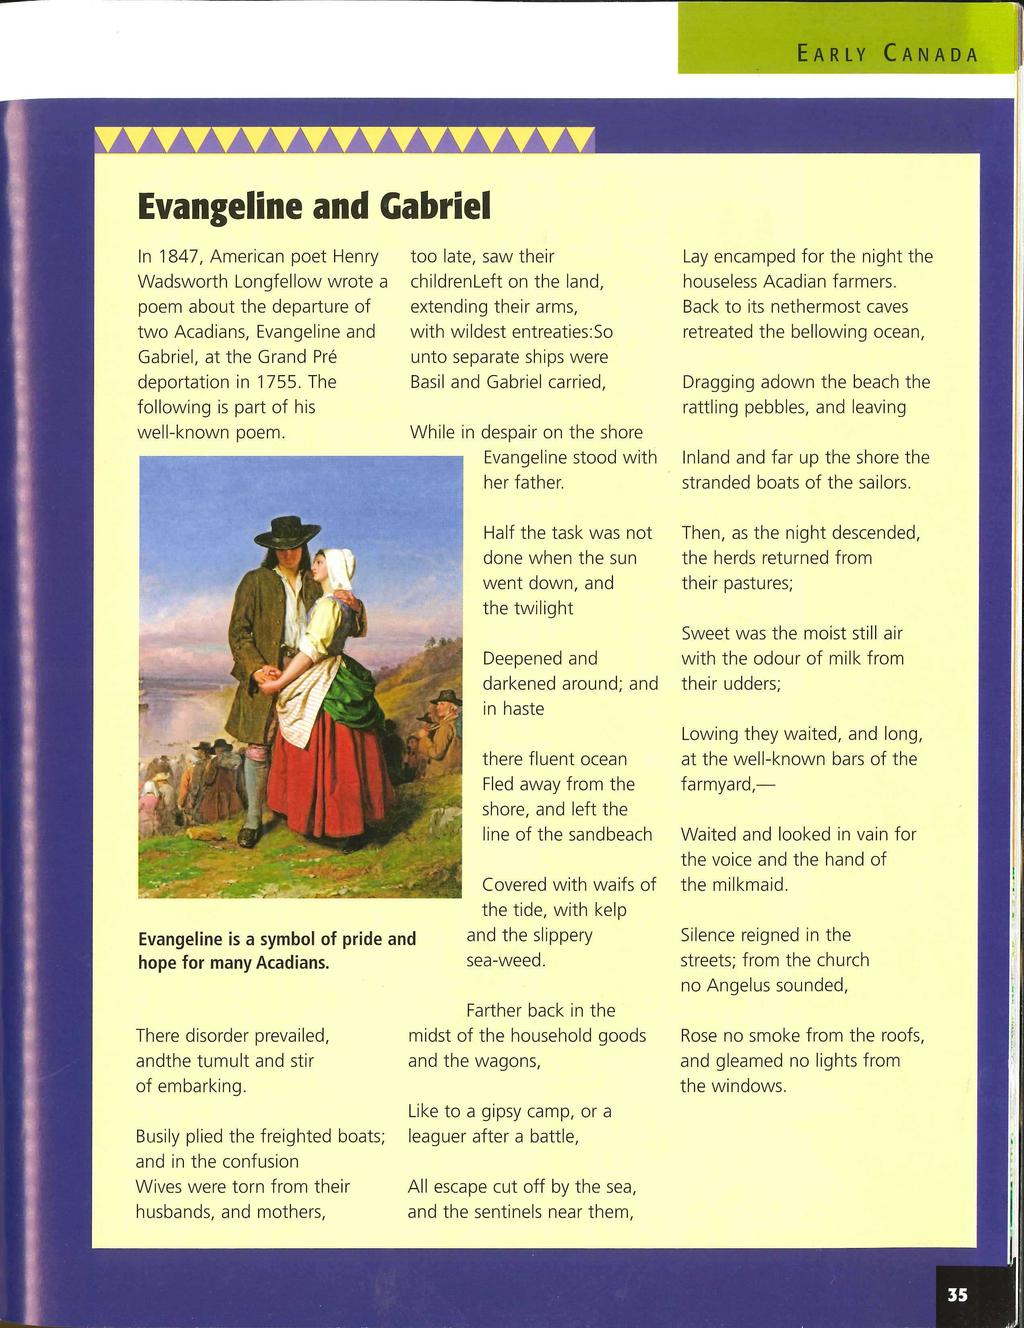 Evangeline and Gabriel In 1847, American poet Henry Wadsworth Longfellow wrote a poem about the departure of two Acadians, Evangeline and Gabriel, at the Grand Pre deportation in 1755.